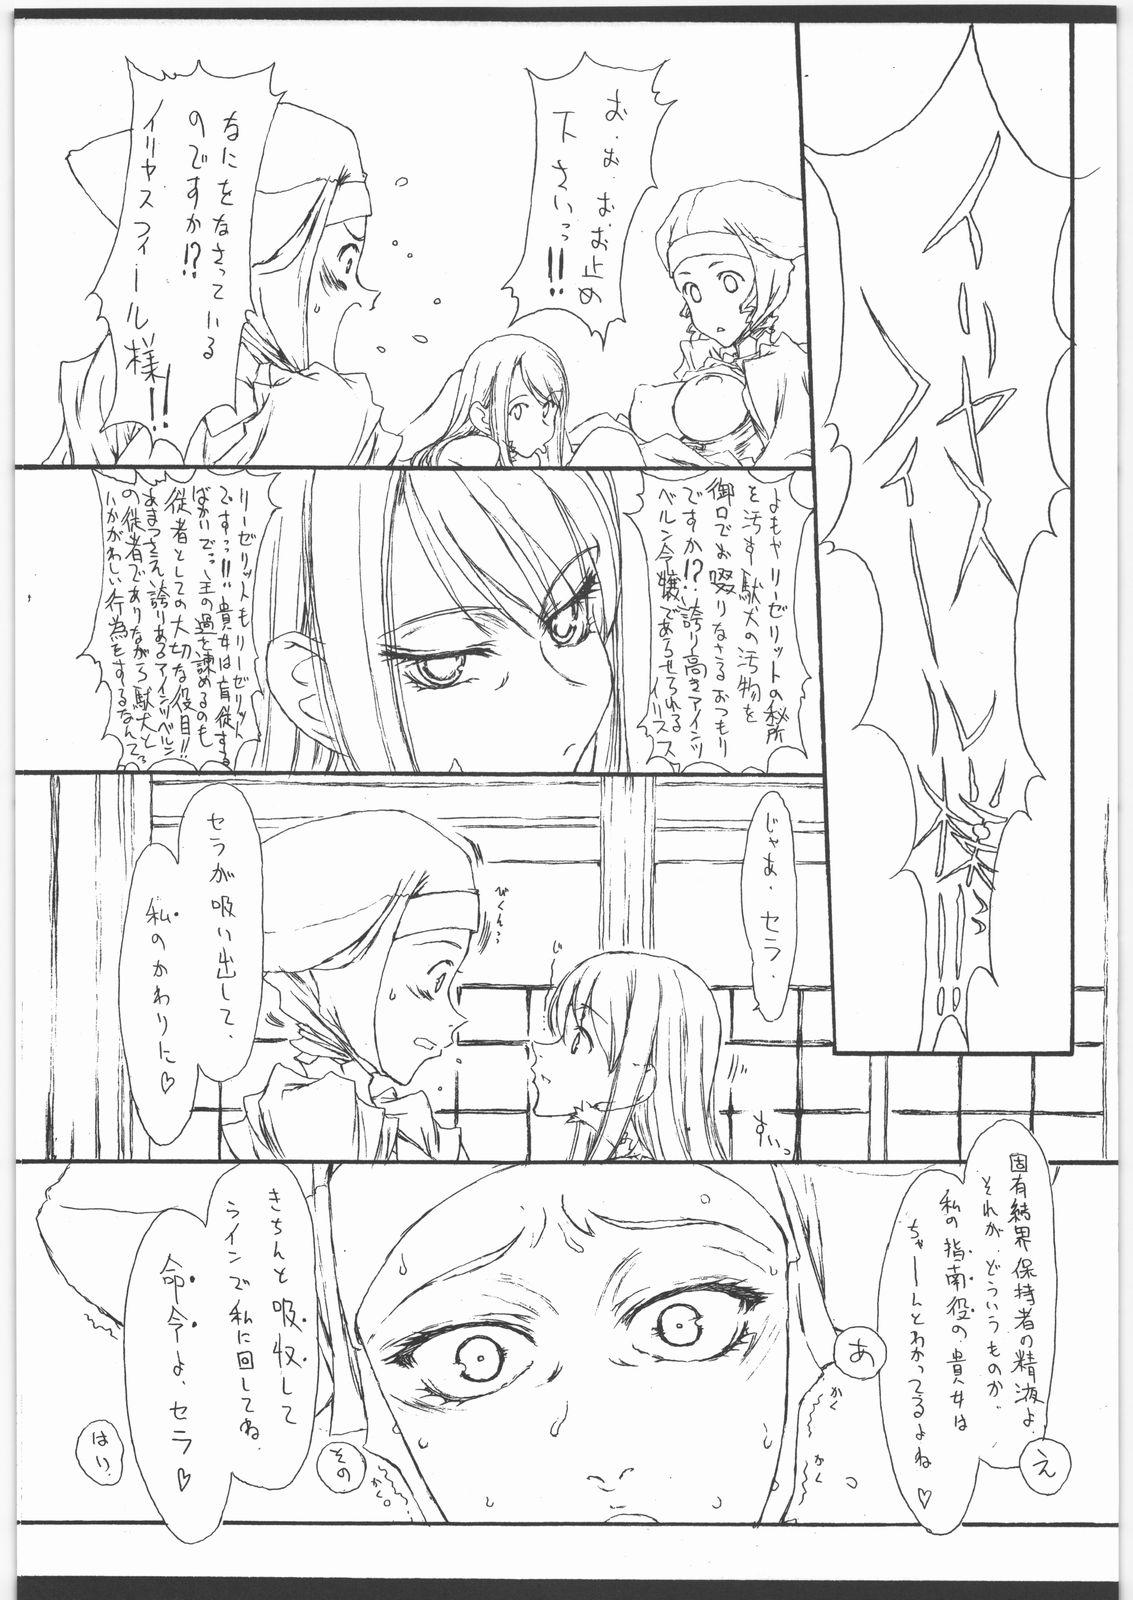 Massages Melancholic Automaton 2 - One day at the castle of Einzbern - Fate hollow ataraxia Gay Bang - Page 8